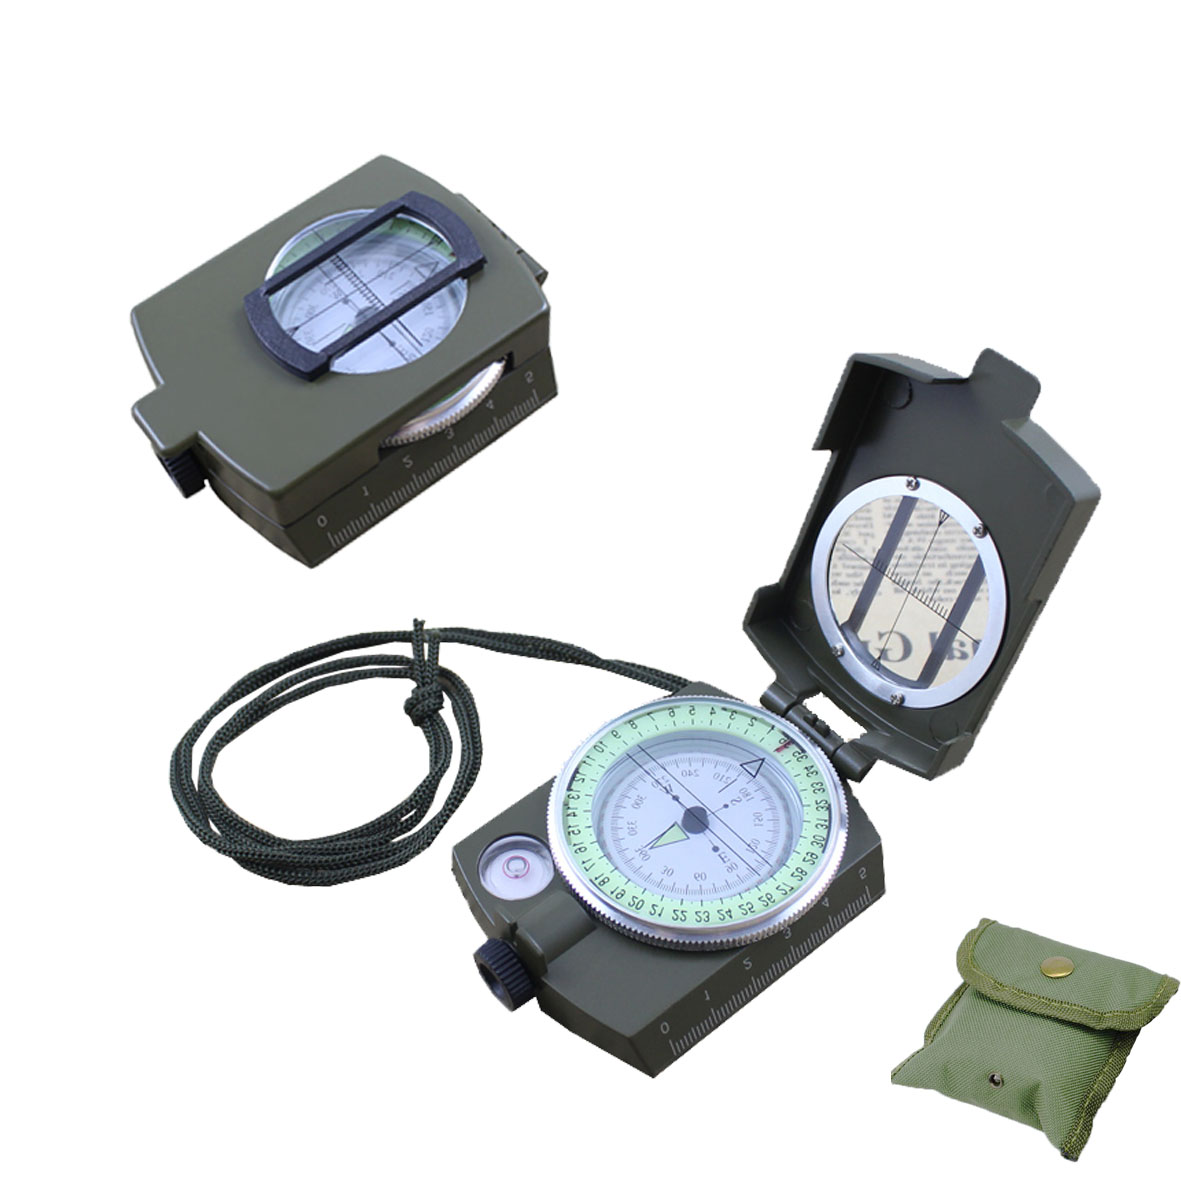 GL-AAA1128 Military Lensatic Sighting Compass with Carrying Bag